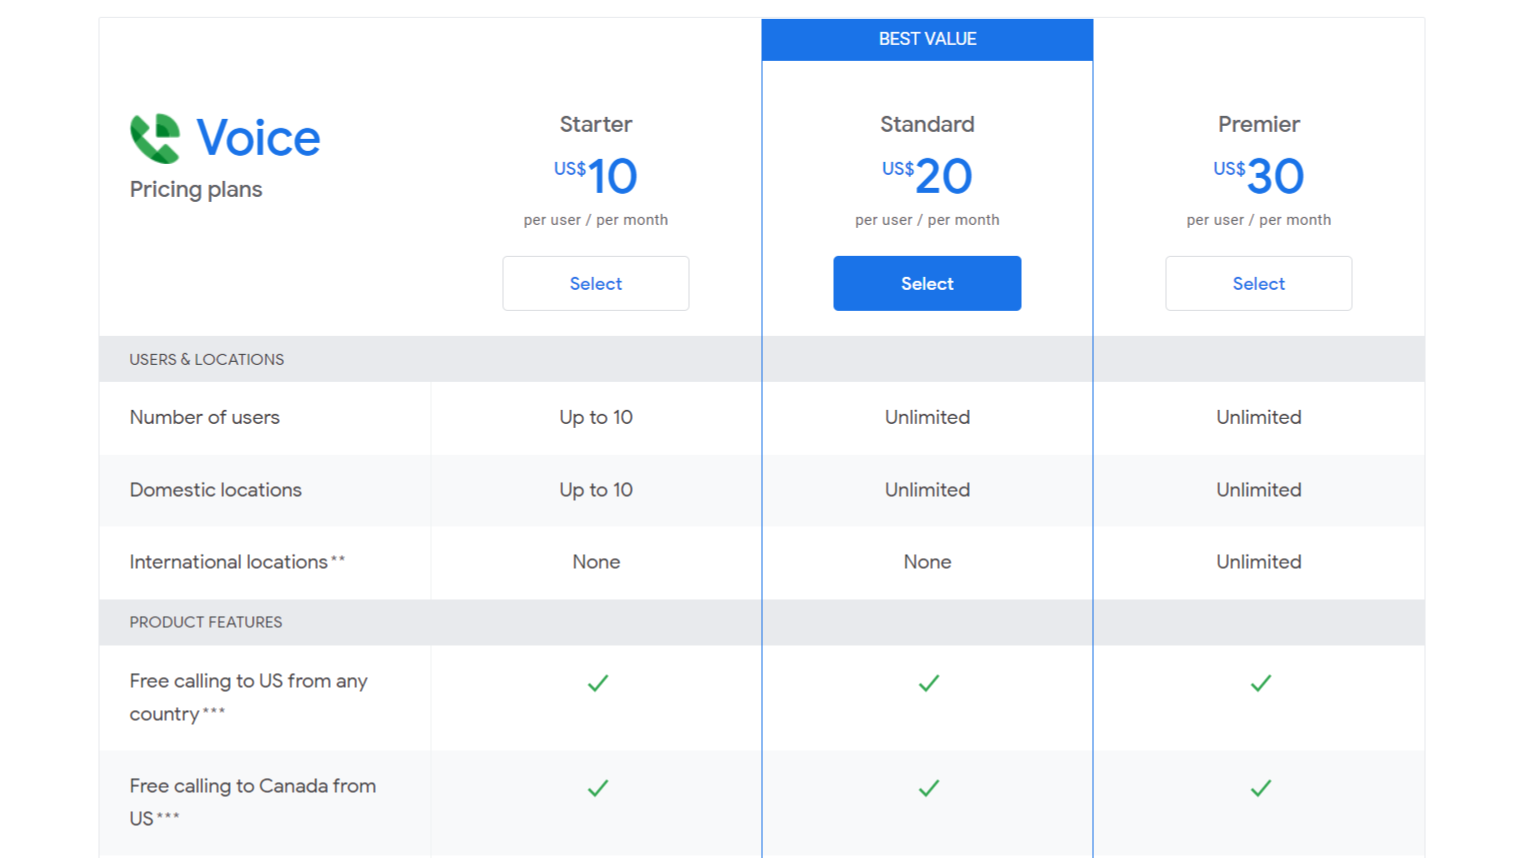 Google Voice Vs Ooma: Pricing